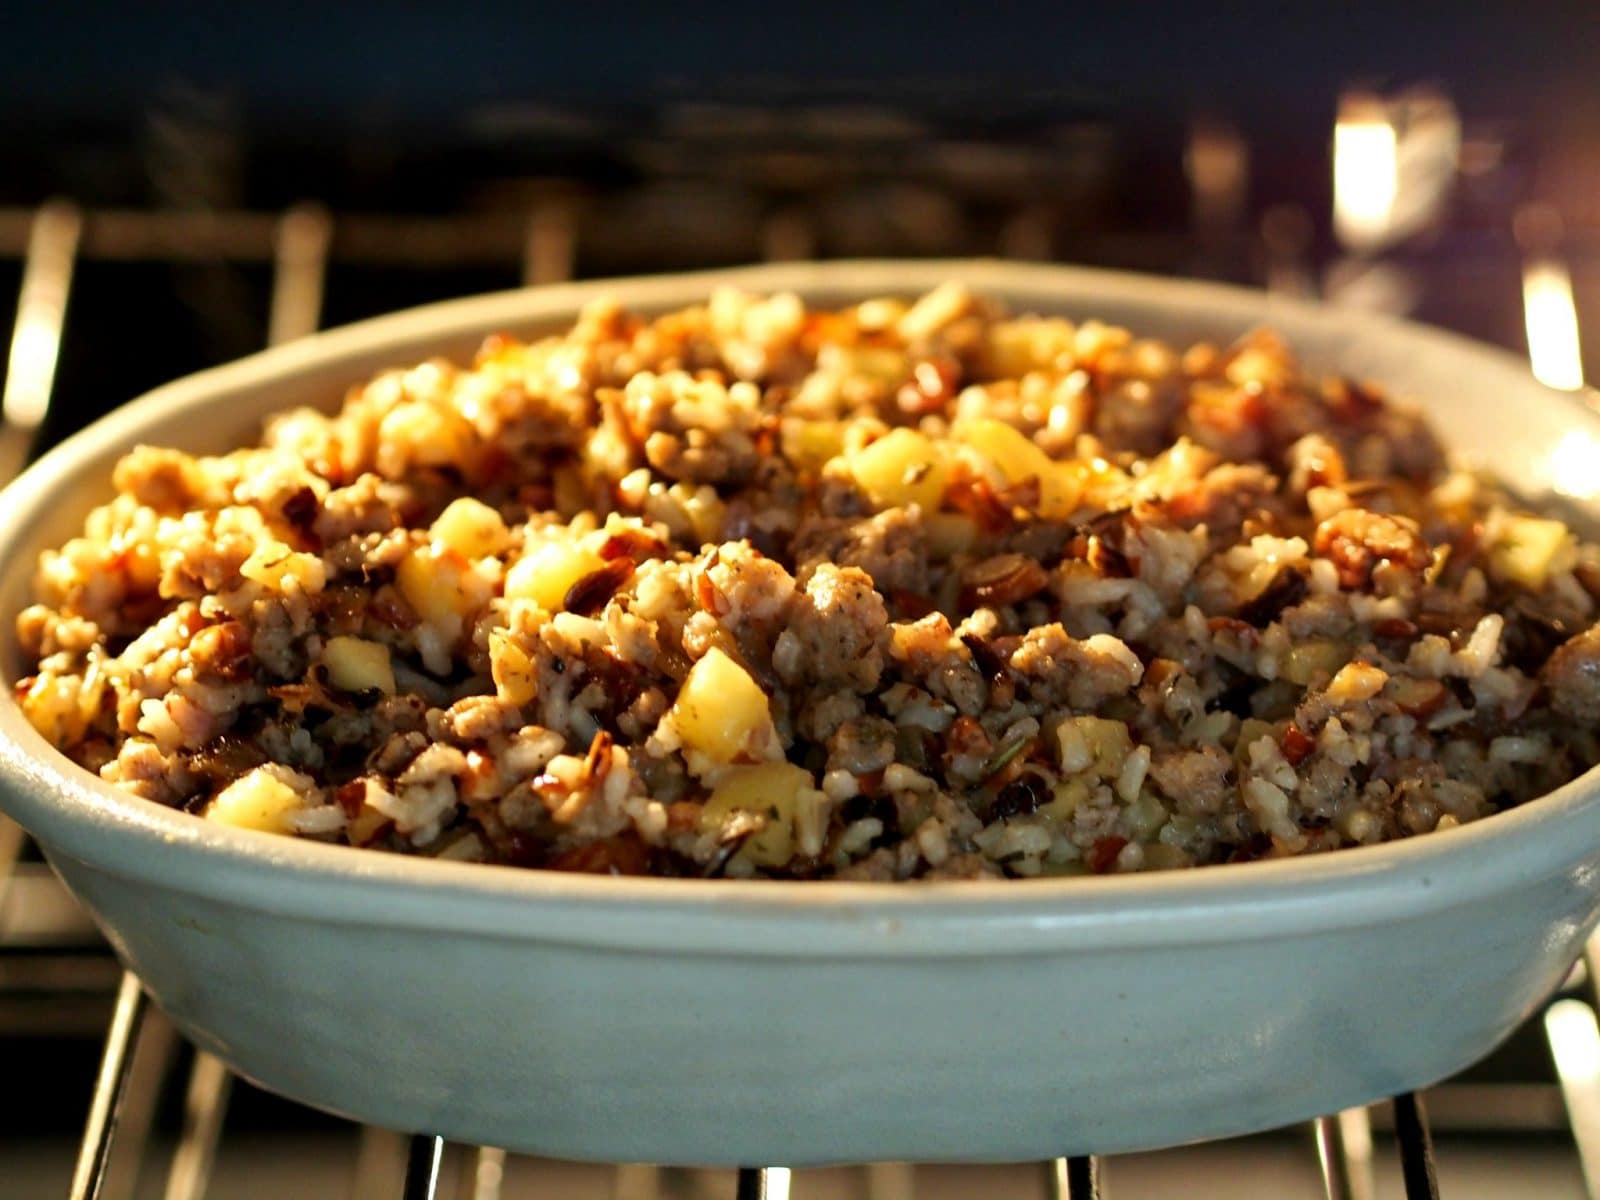 Wild Rice, Jones Sausage & Apple Stuffing is not just for Thanksgiving. Wild rice, sausage, apples, pecans & a splash of Southern Comfort - perfection. simplysated